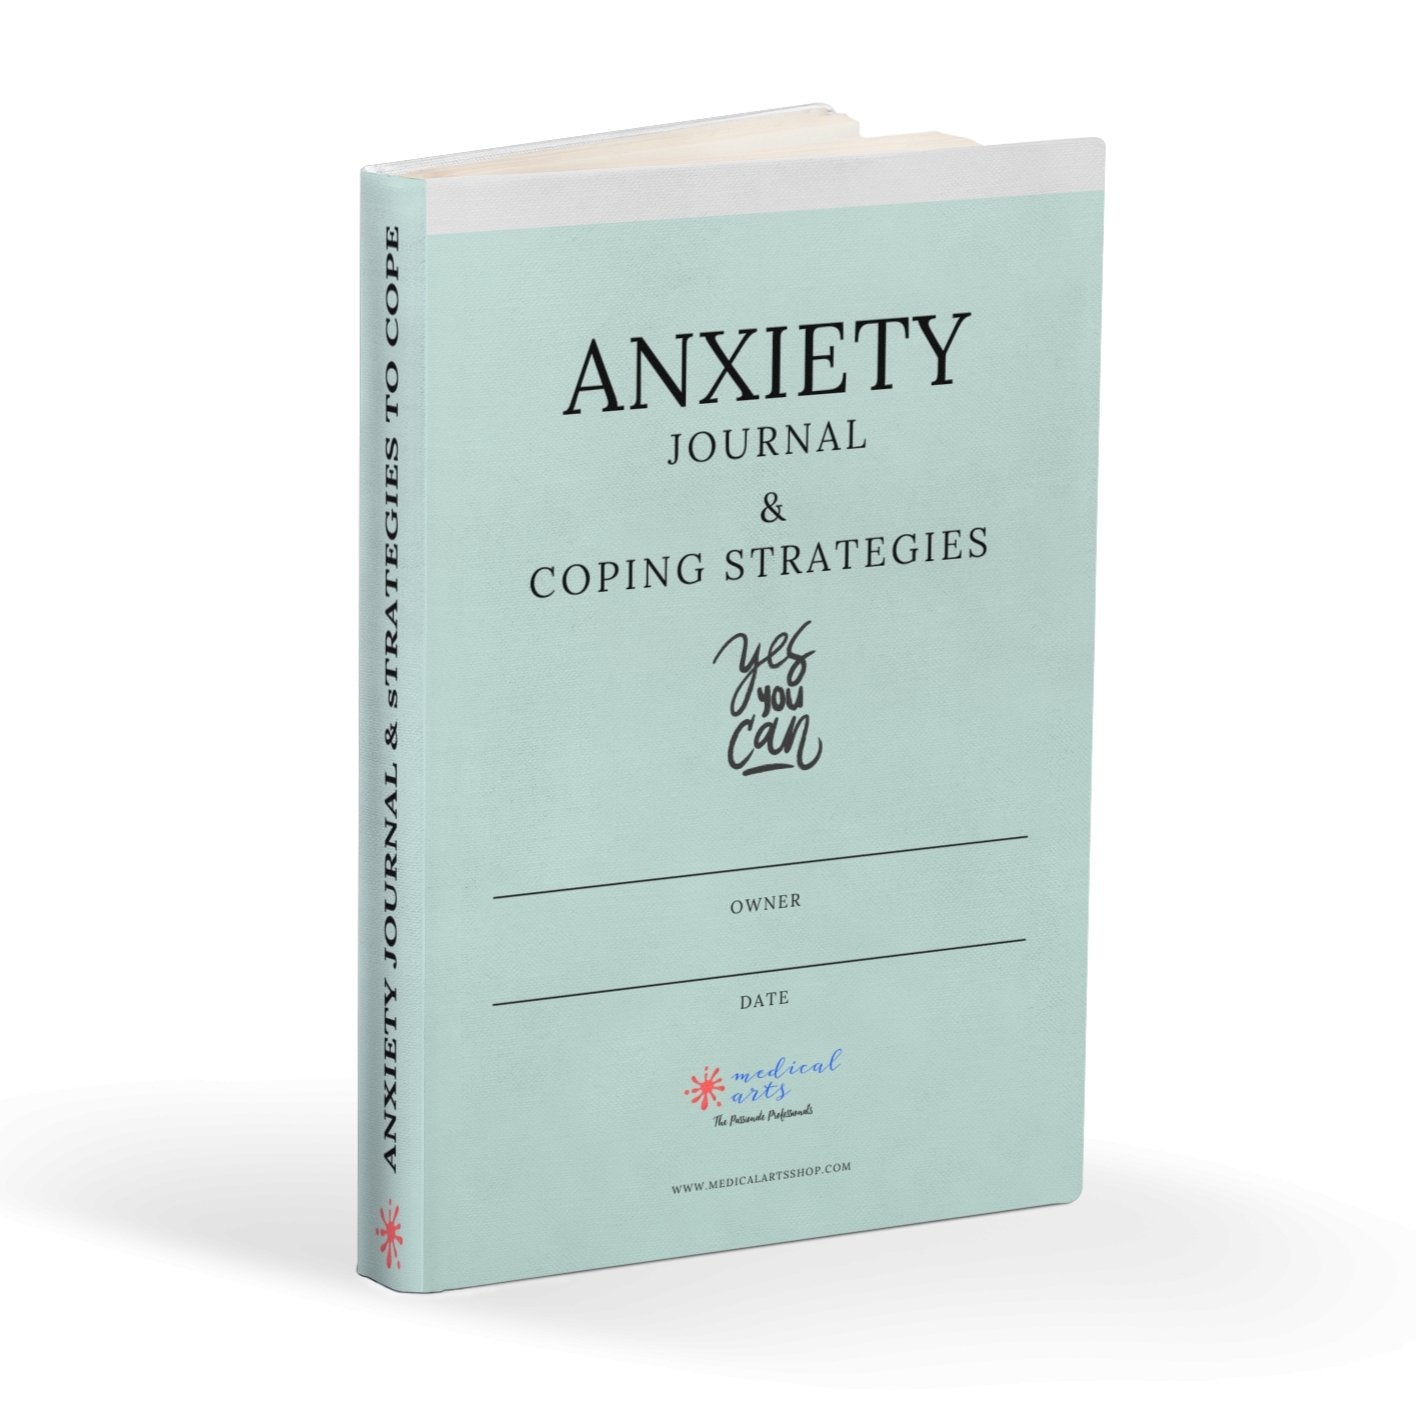 Anxiety Journal Prompts pdf ◘ Strategies To Cope With Anxiety ◘ Freebie Included - Instant Download - Medical Arts Shop